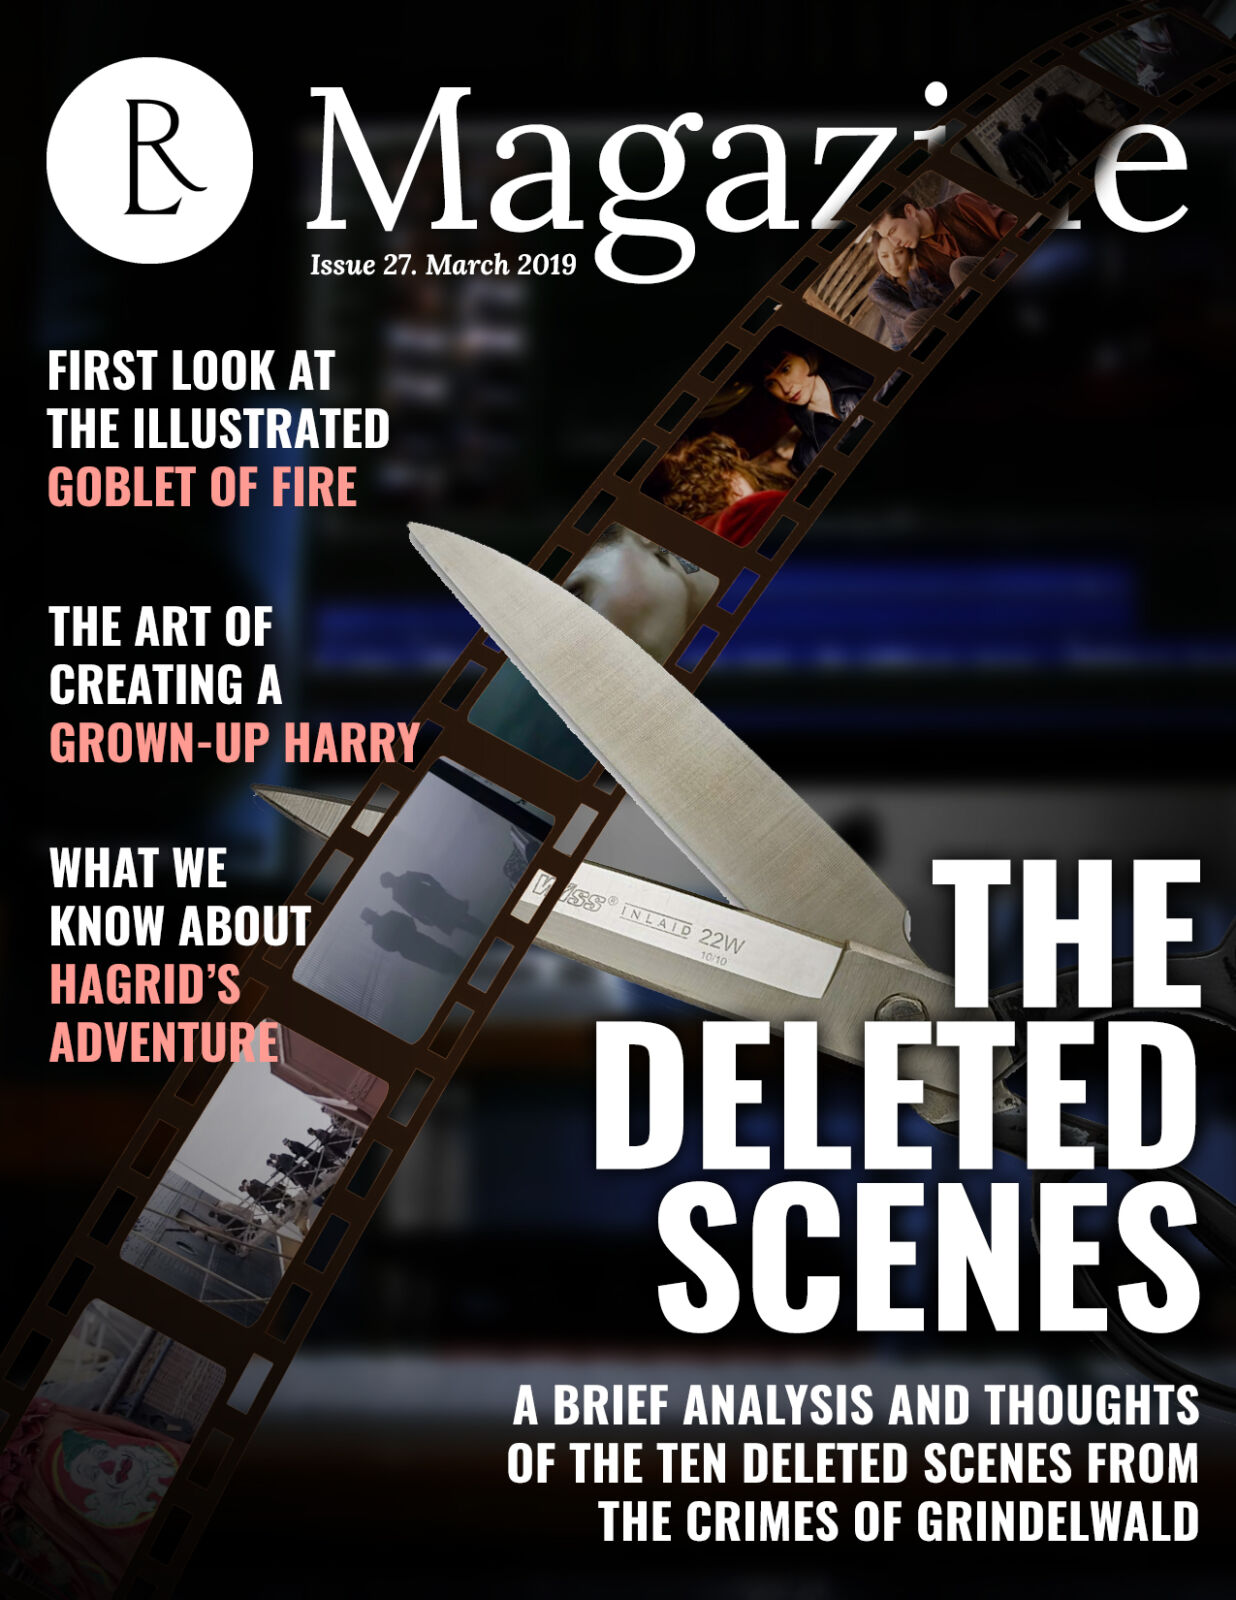 The Rowling Library Magazine #27 (March 2019): The Deleted Scenes